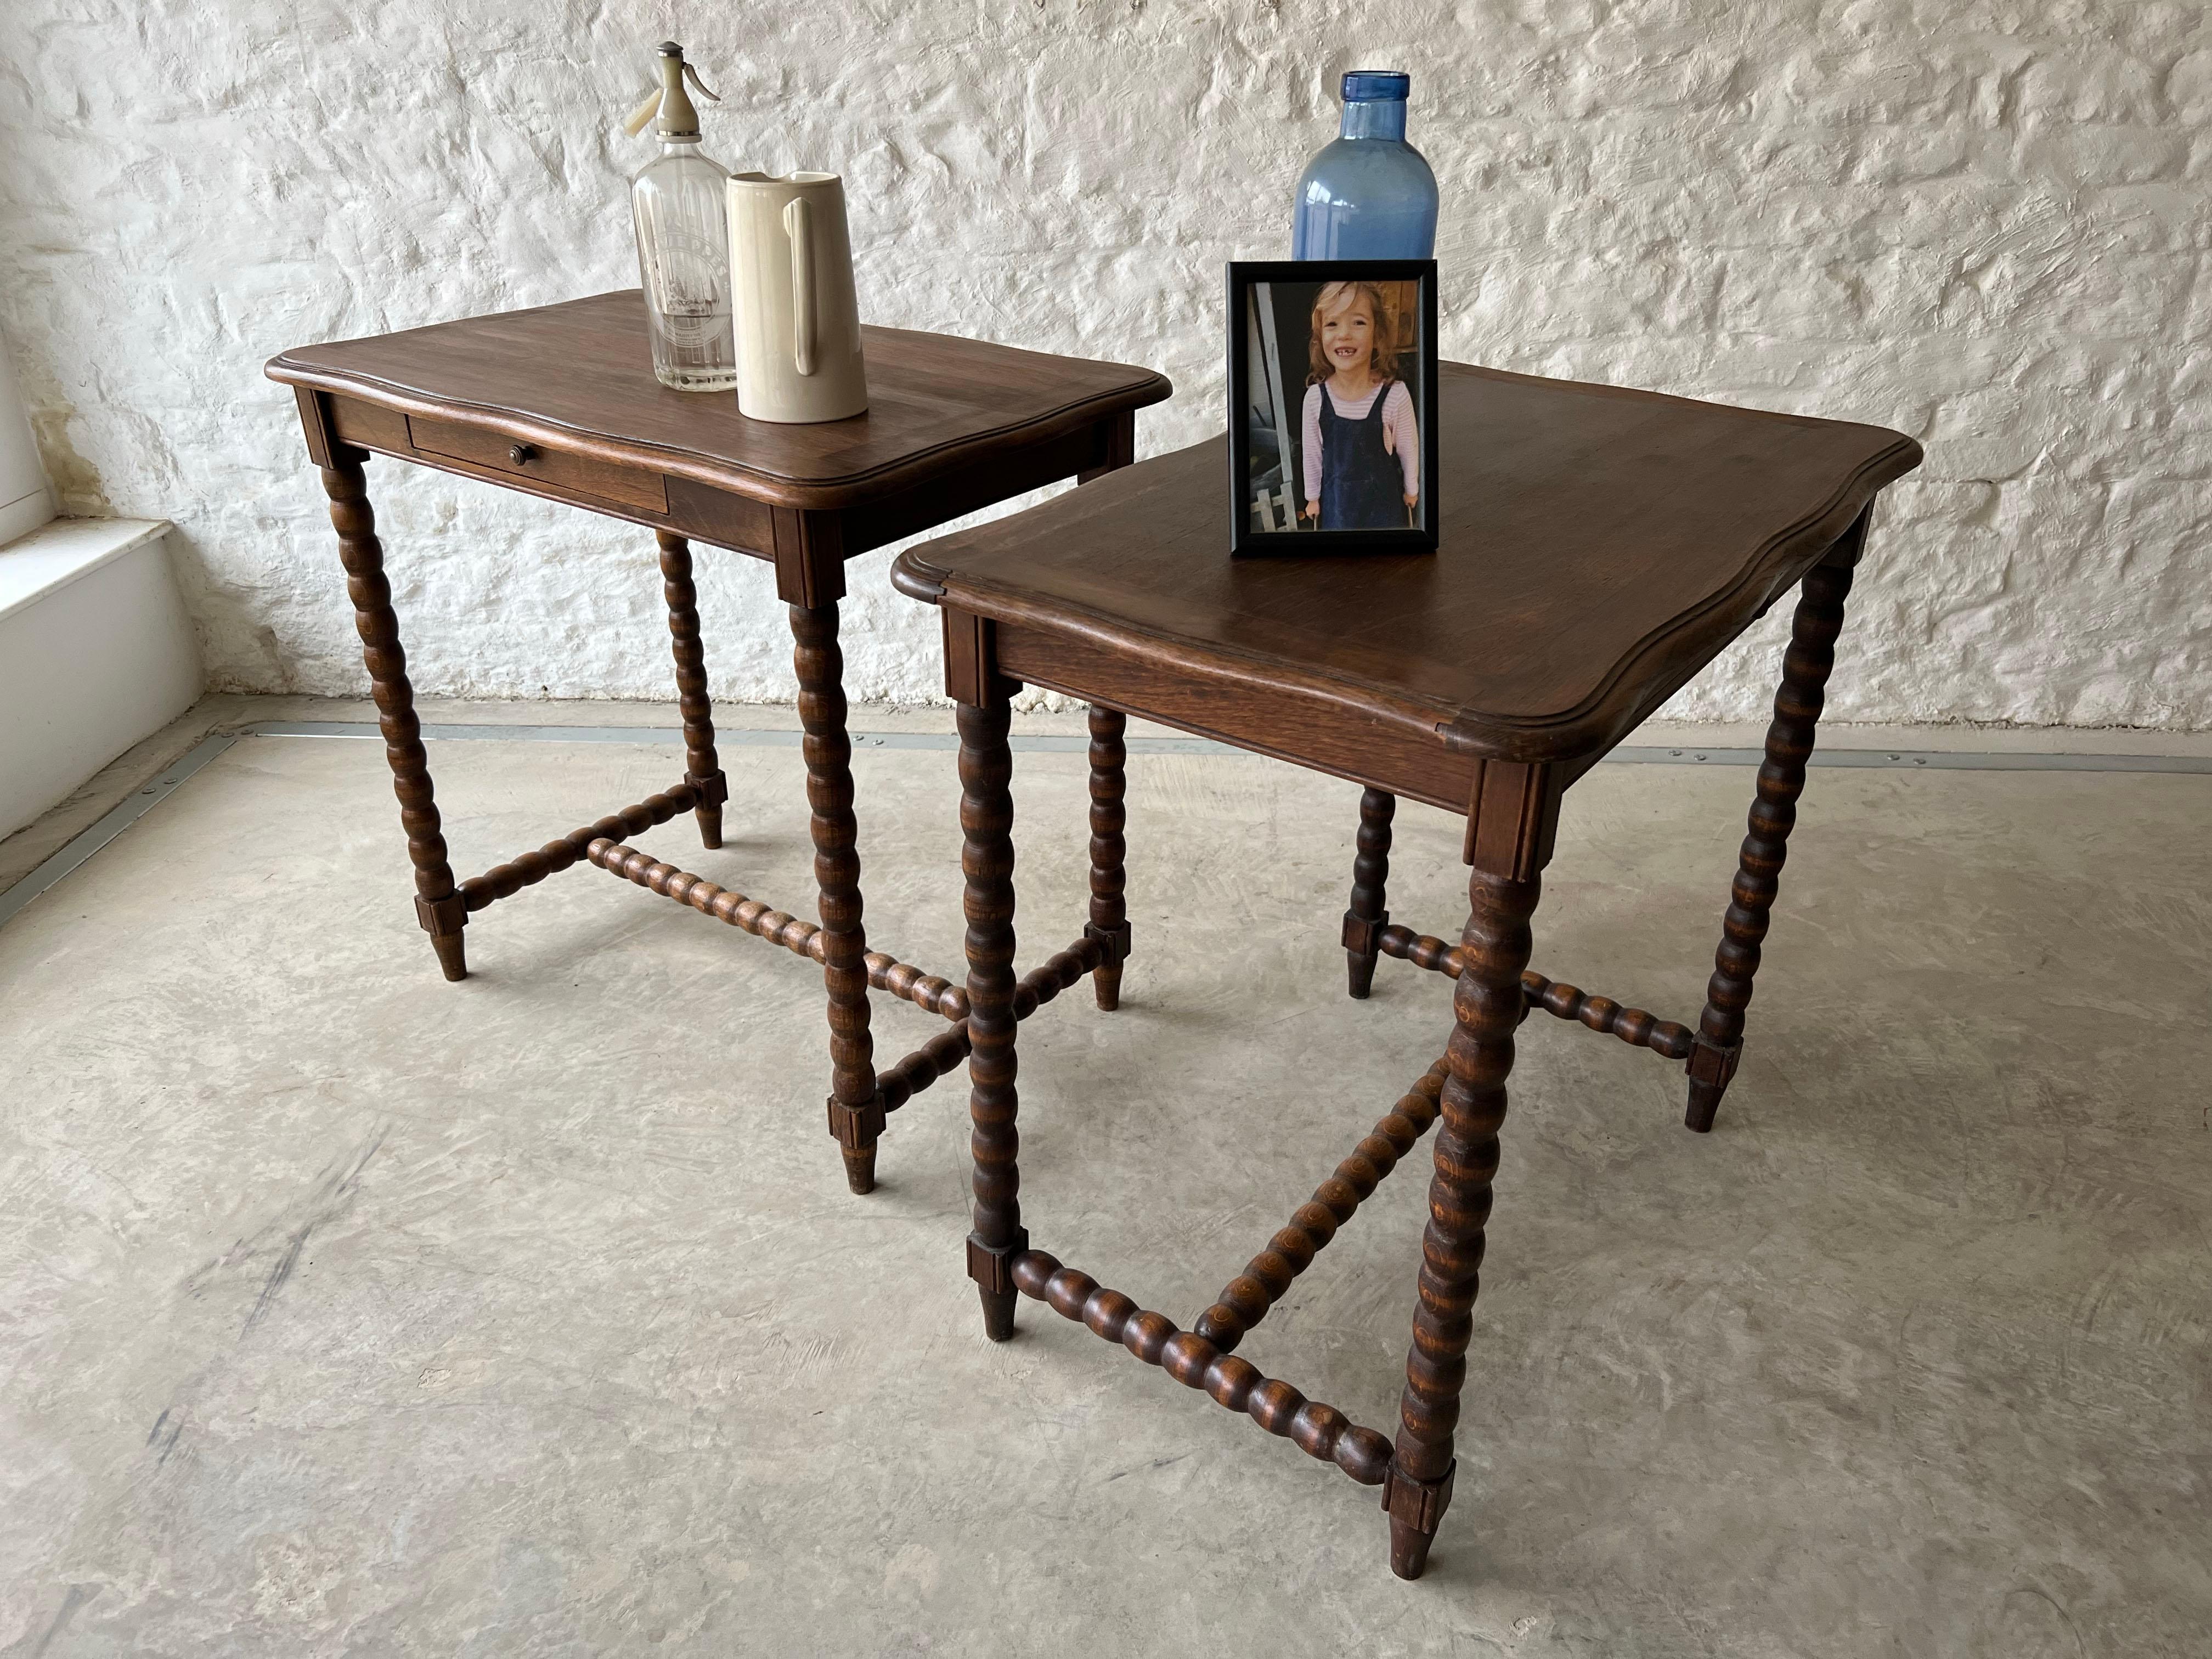 These fun French bobbin tables are mid 20th century and made from Oak. So easy to place as side tables in a sitting room or hallway or also could be used as bedside tables with their useful drawer.

In excellent condition having been